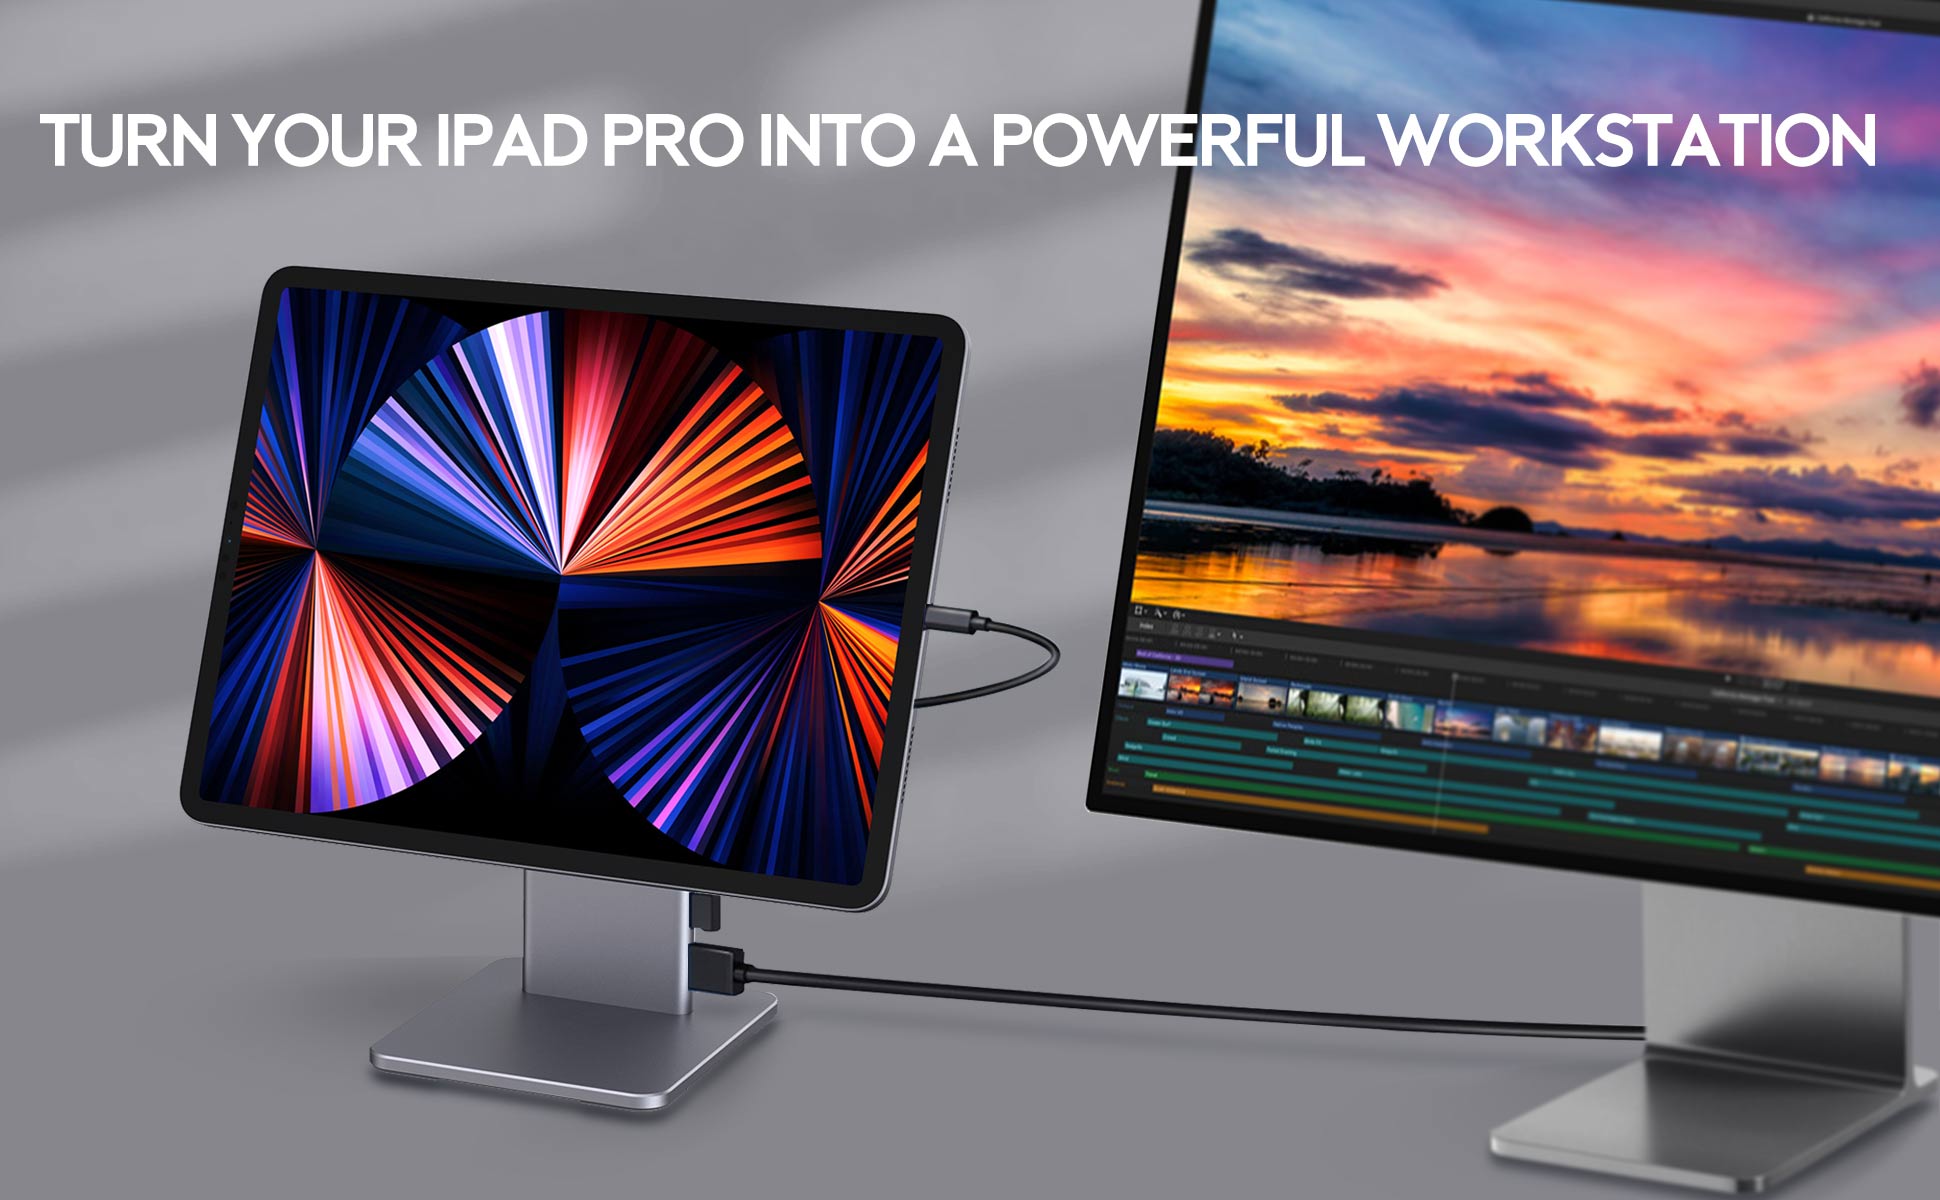 Turn-Your-iPadPro-into-a-Powerful-Workstation